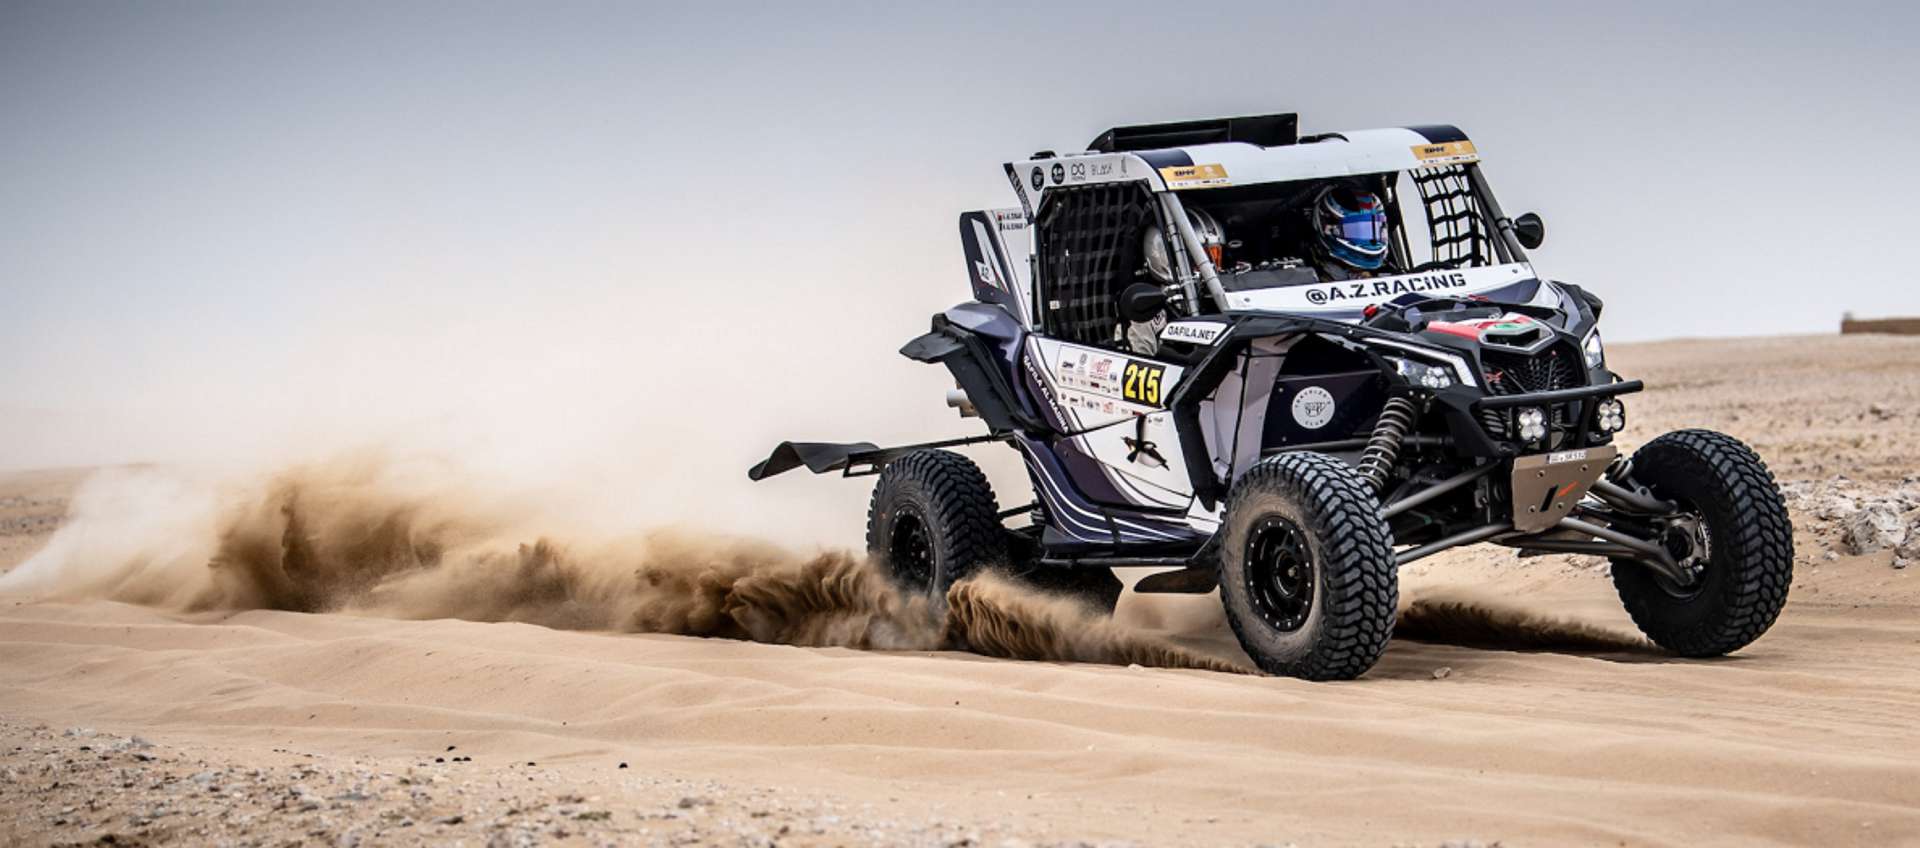  Italian Baja 2019: AZ Racing back in action after 2 month break as FIA World Cup for Cross Country Bajas resumes